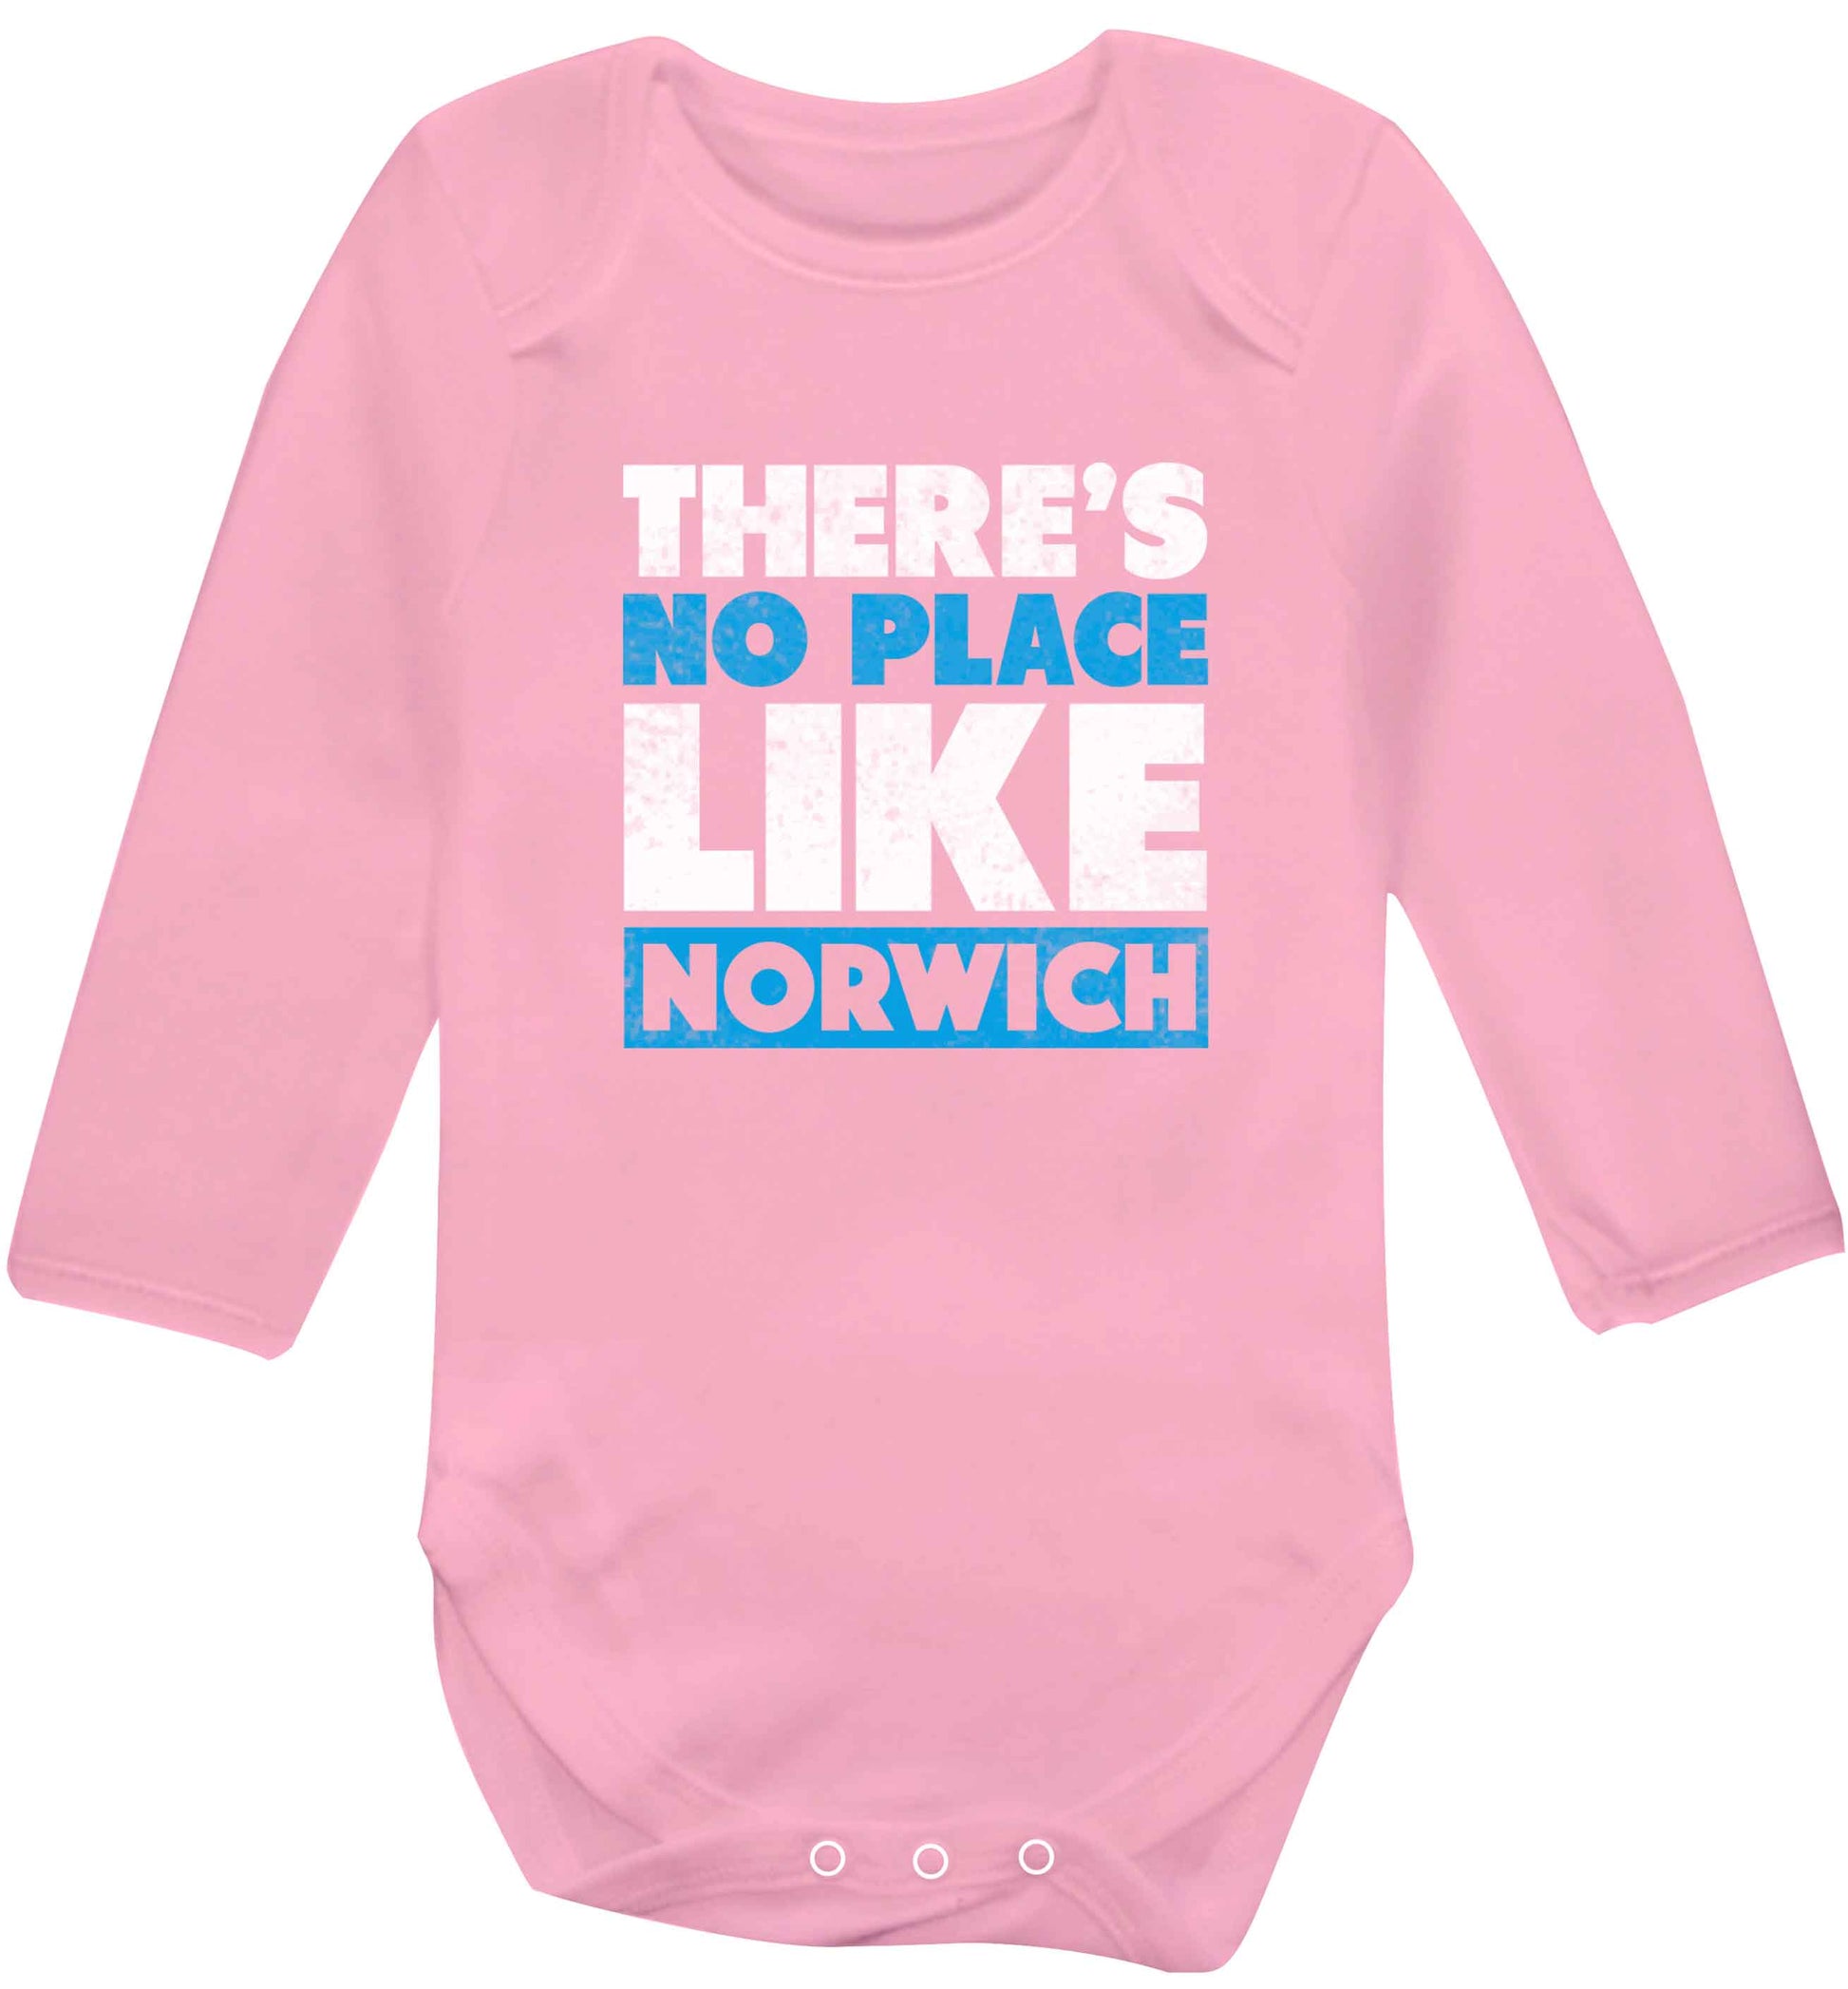 There's no place like Norwich baby vest long sleeved pale pink 6-12 months